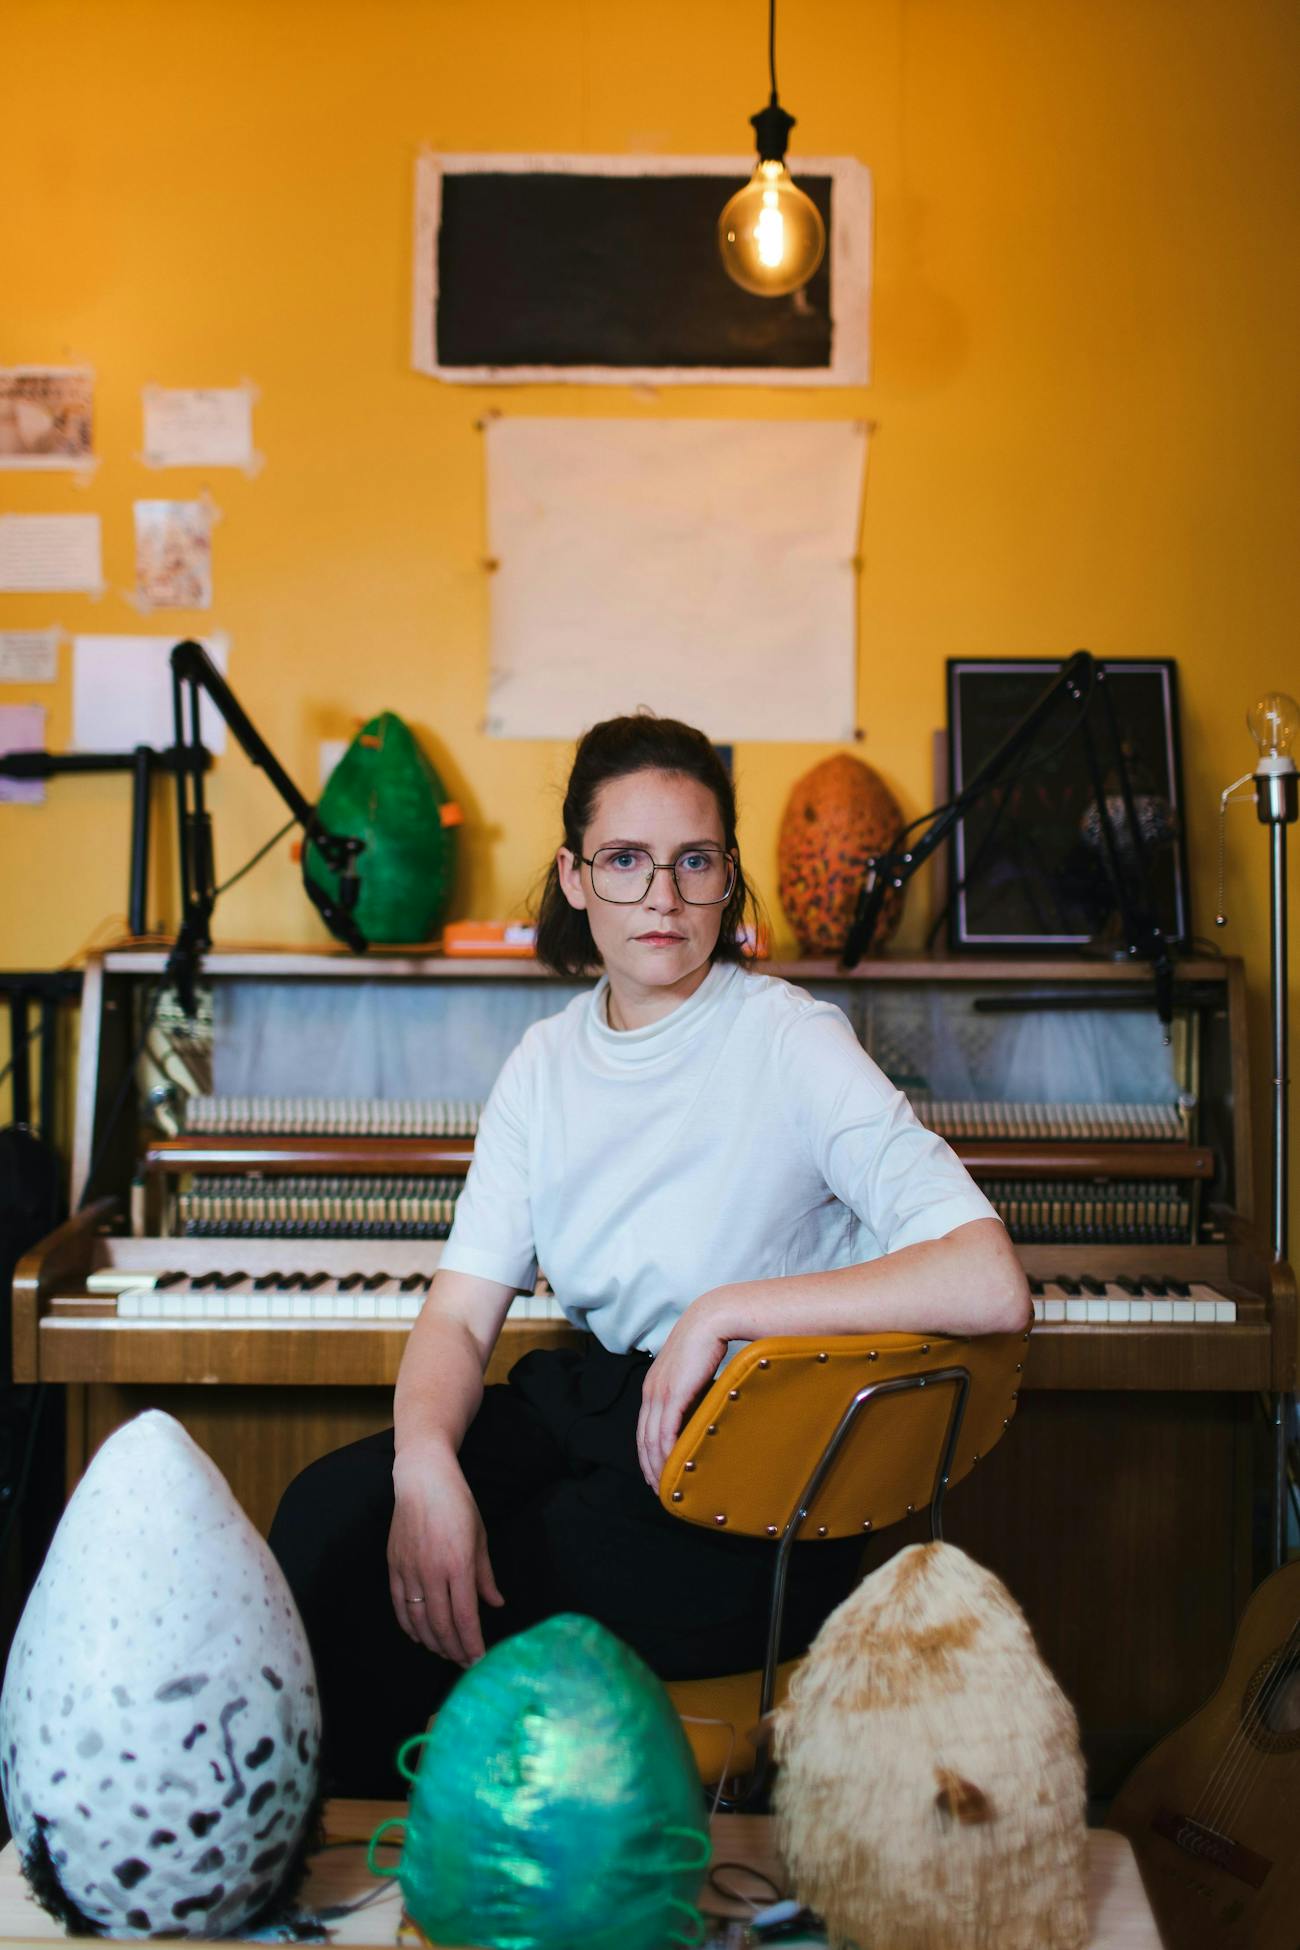 Sóley Stefánsdóttirsits in front of a piano. She looks at the camera. In the background there are two colorful sculptures resembling eggs.